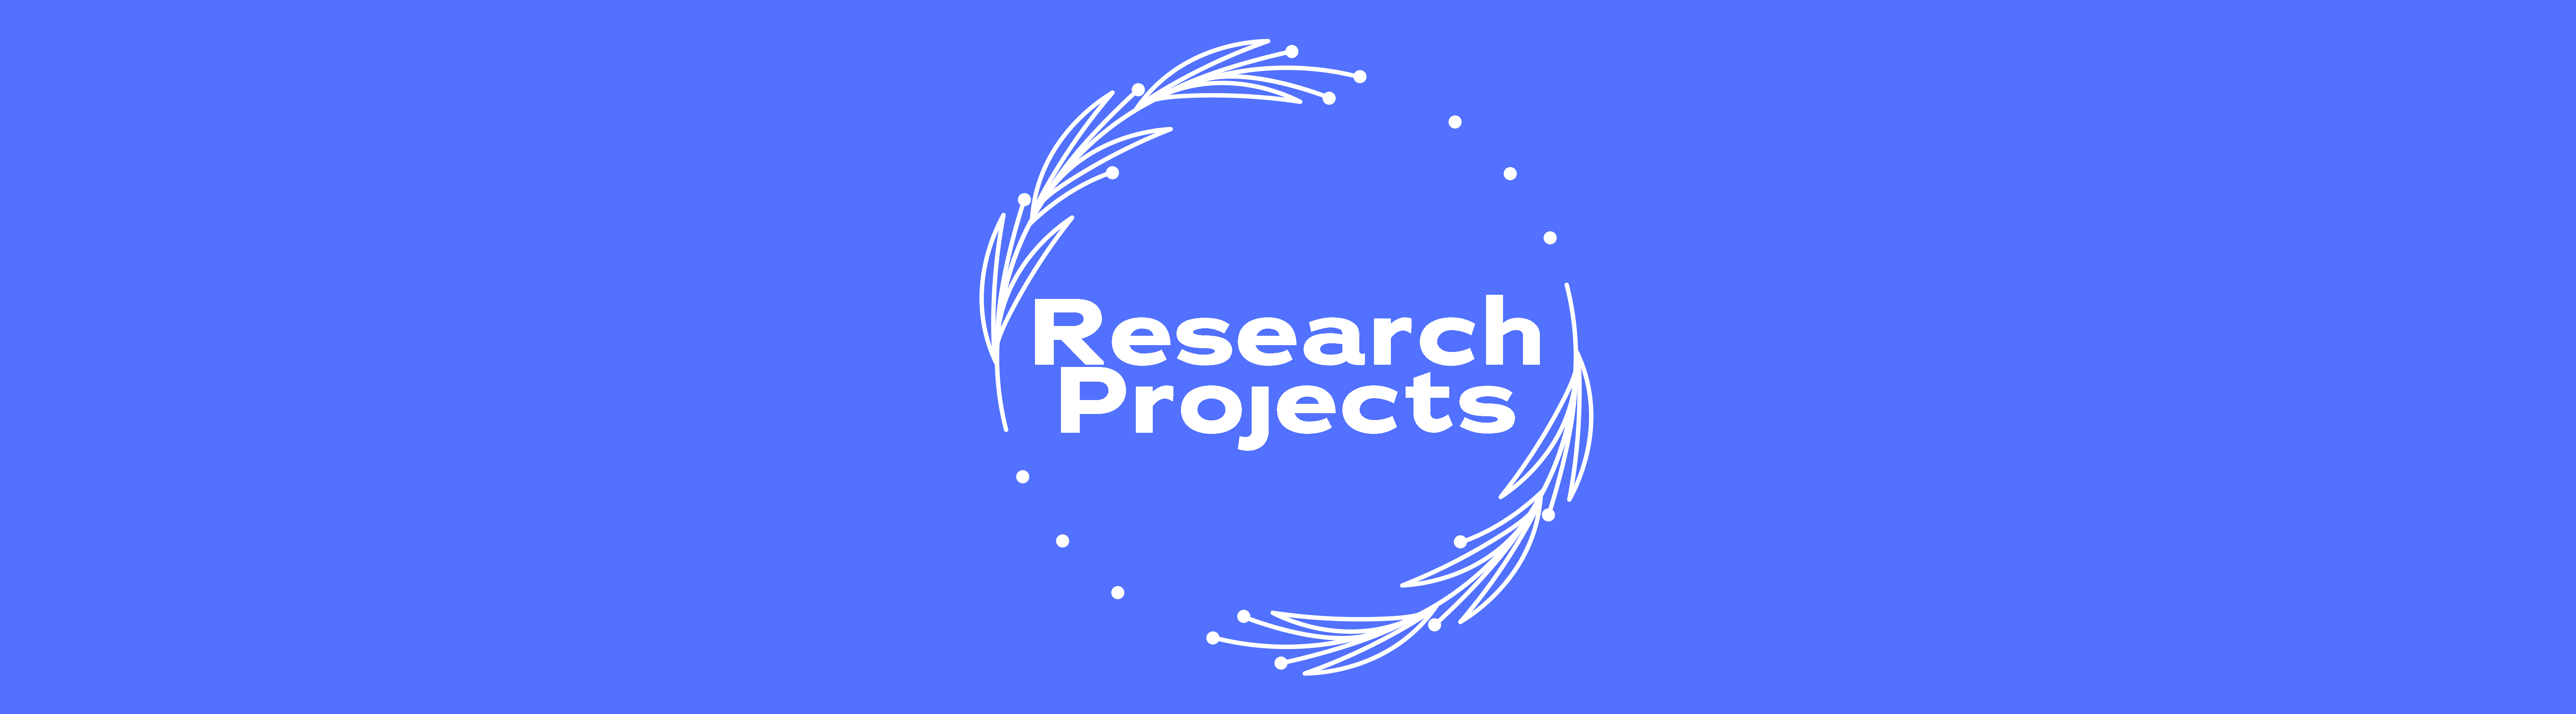 Research Projects Banner Graphic